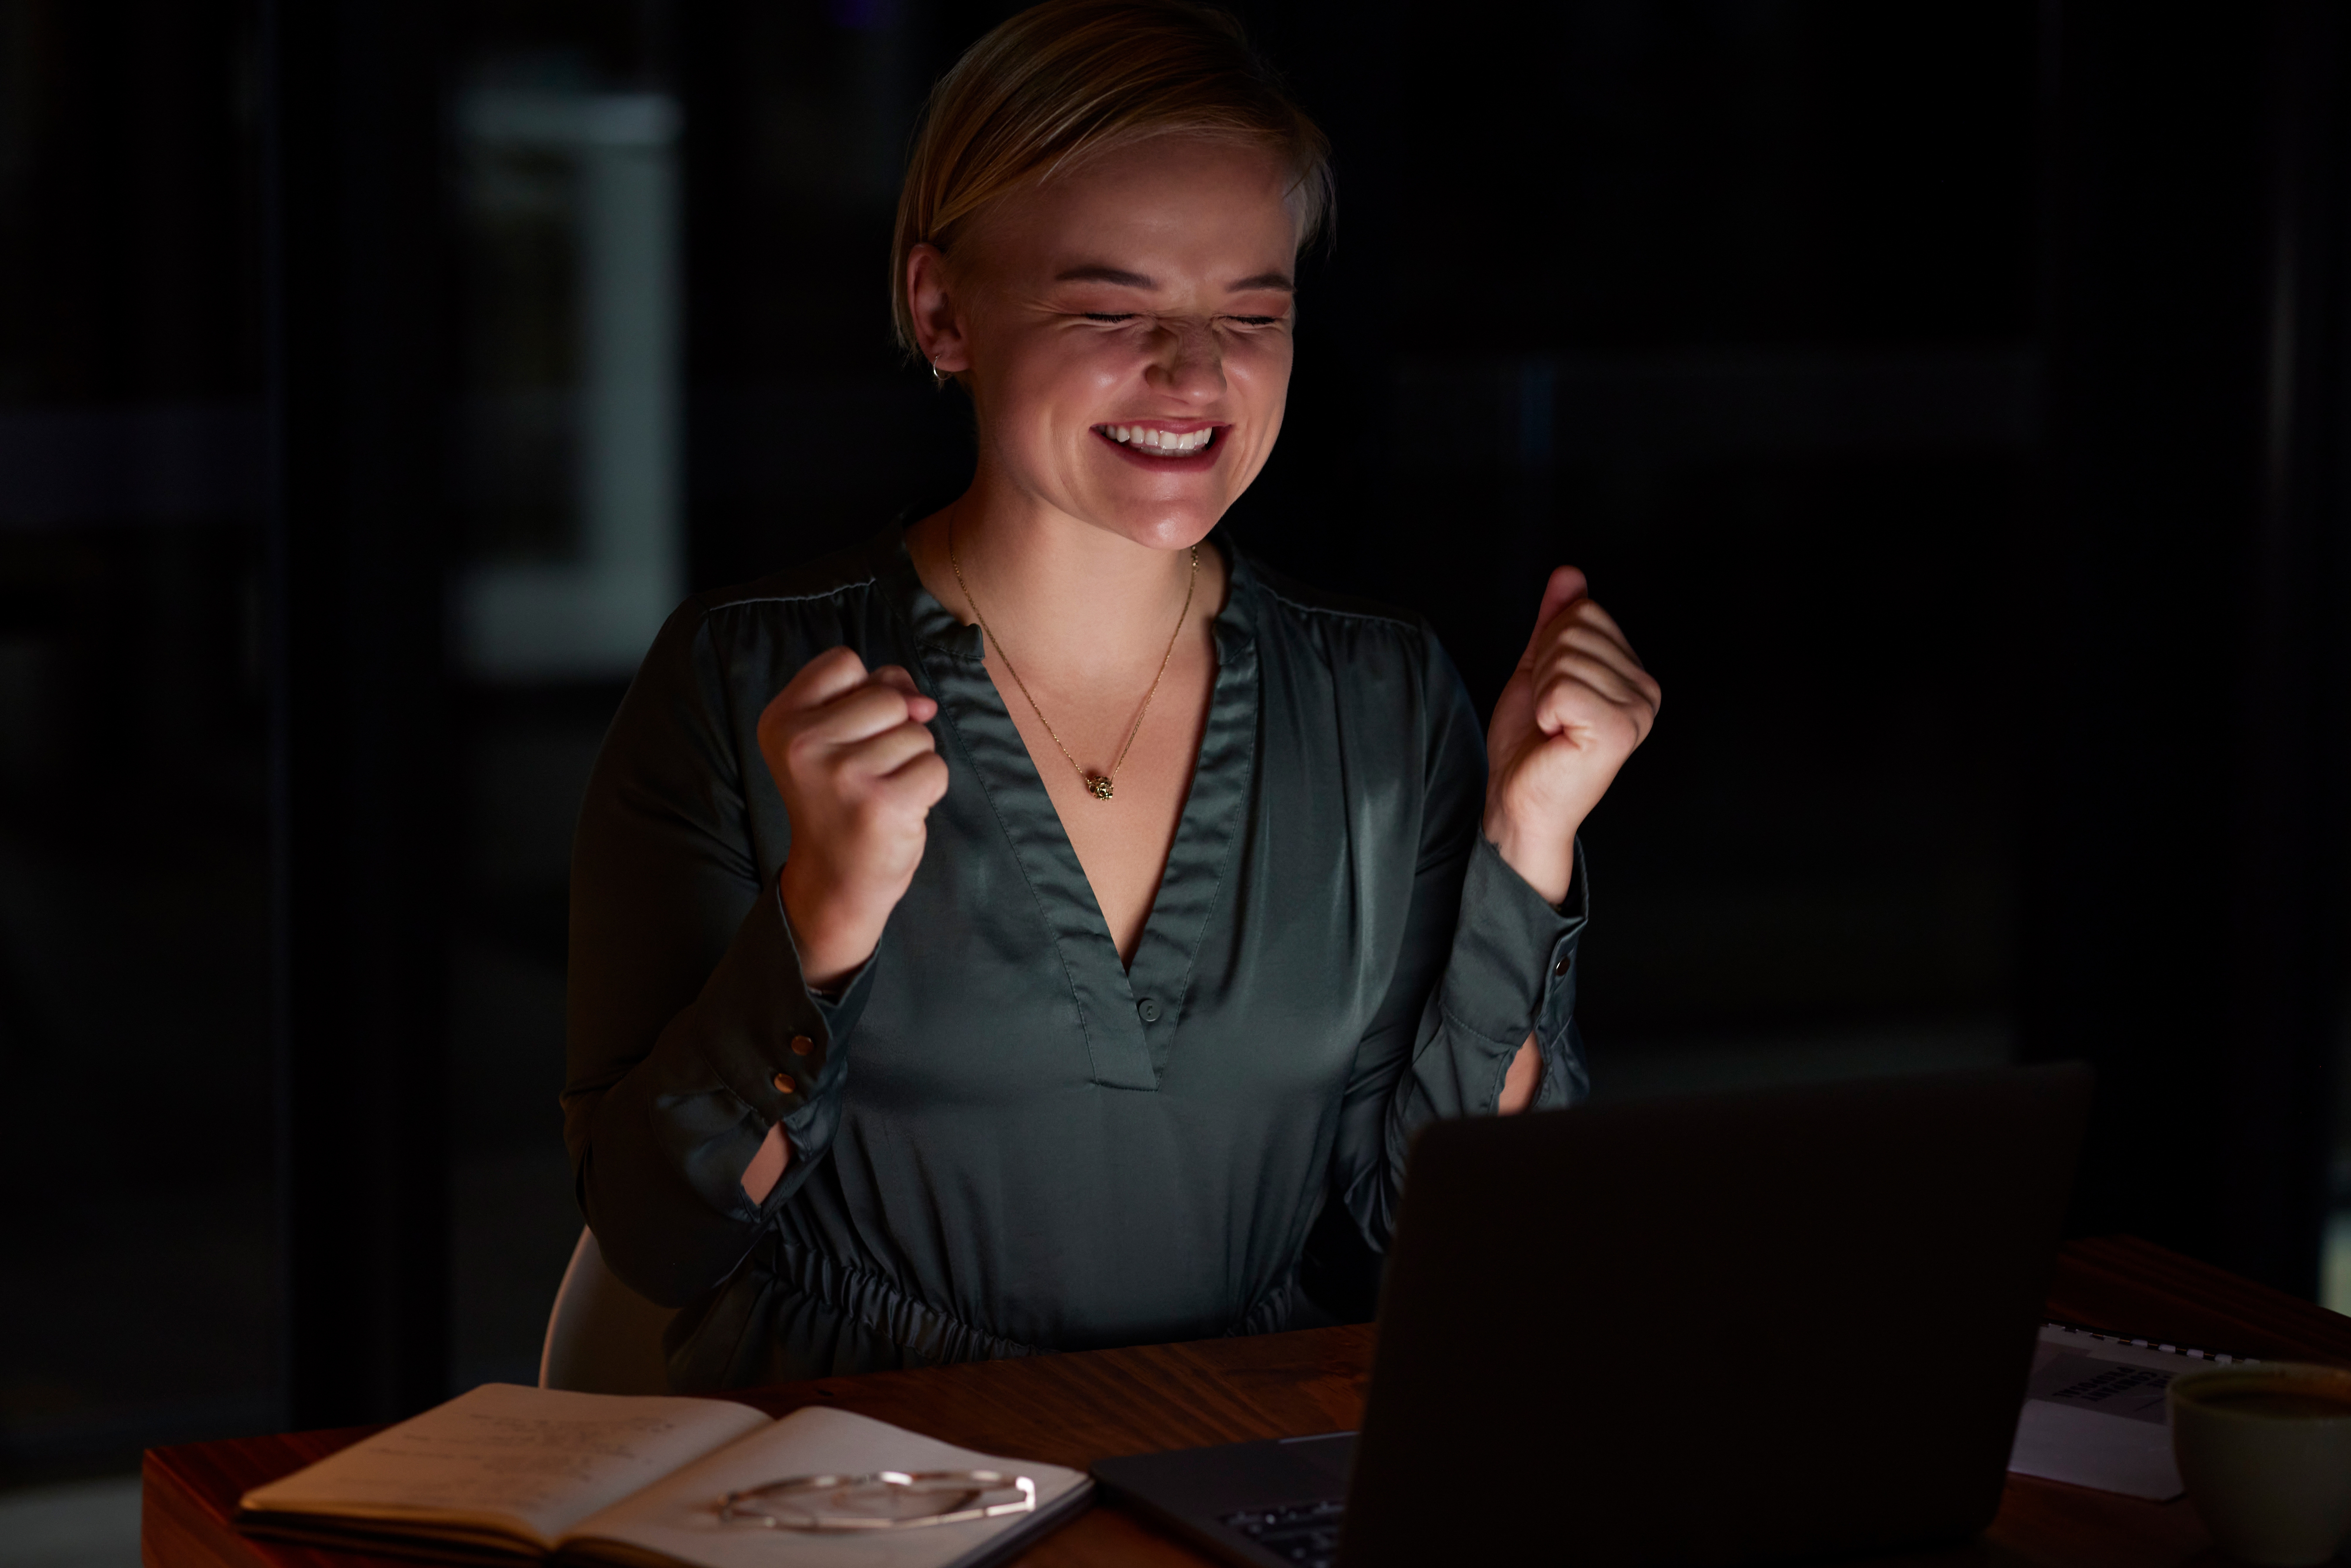 Night, laptop and woman with achievement. | Source: Shutterstock